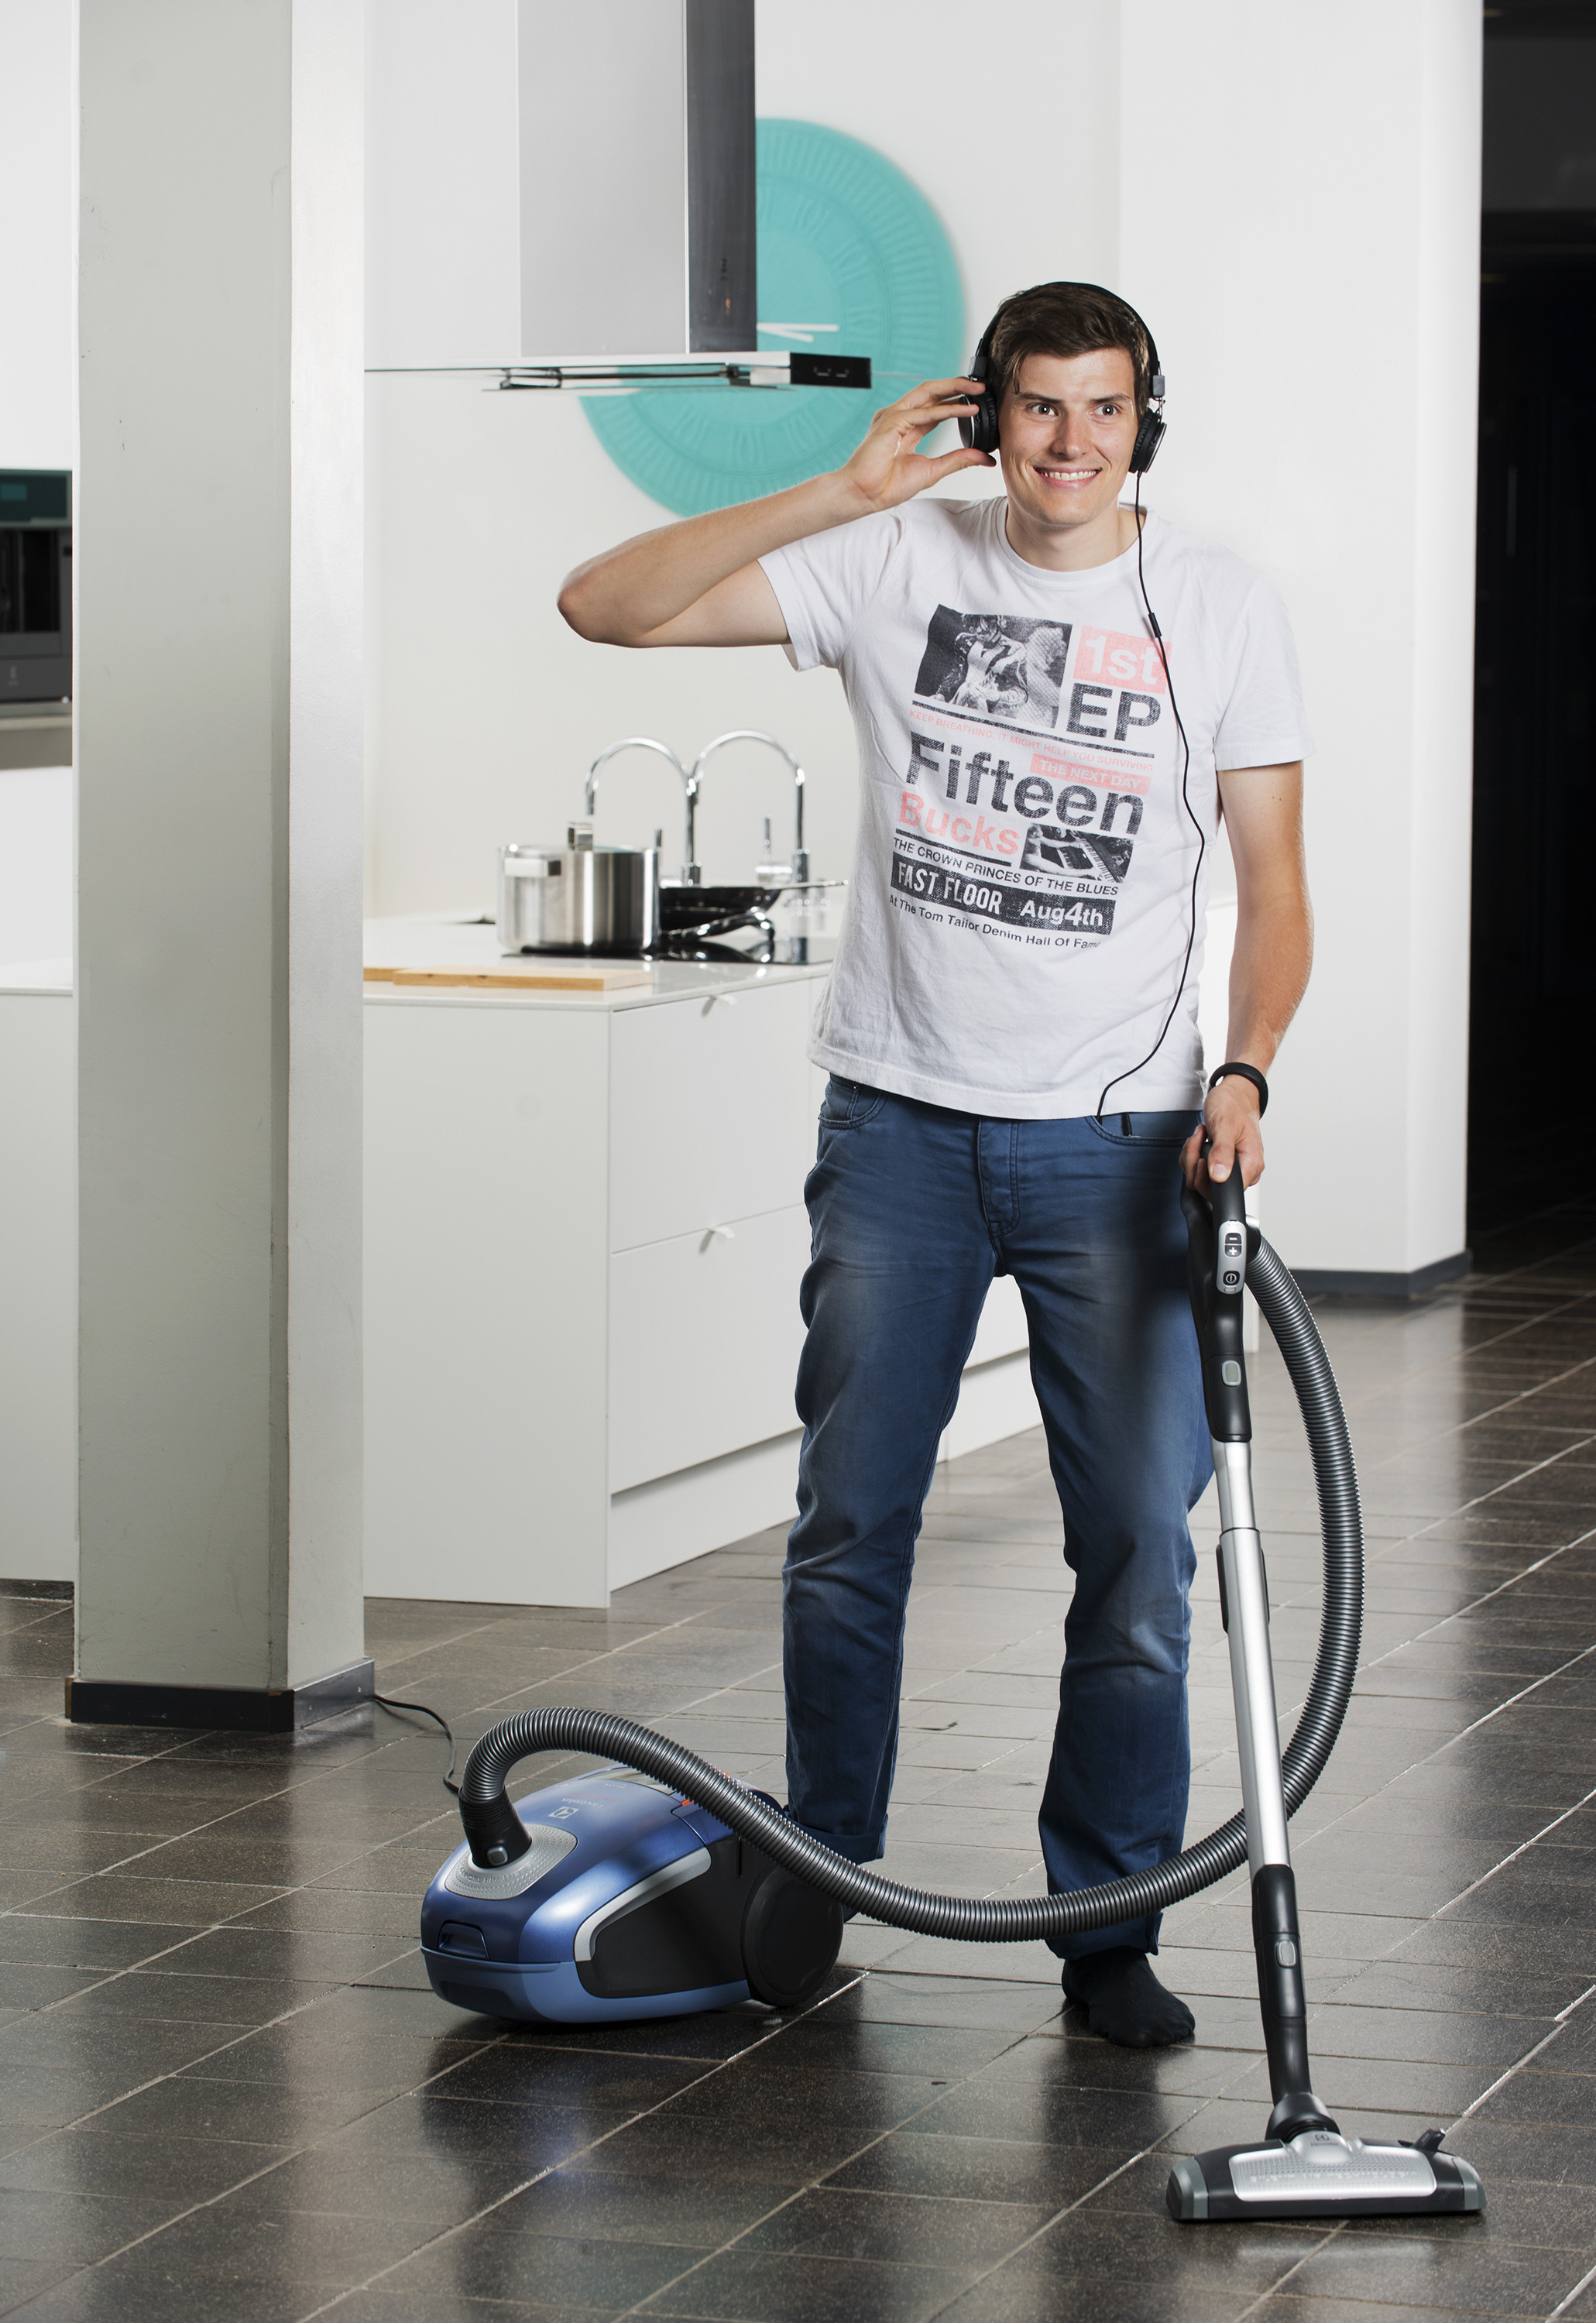 16 Recommended Best Vacuums for Hardwood Floors 2016 2024 free download best vacuums for hardwood floors 2016 of global cleaning habits exposed in electrolux vacuuming survey regarding electrolux global vacuuming survey 2013 music